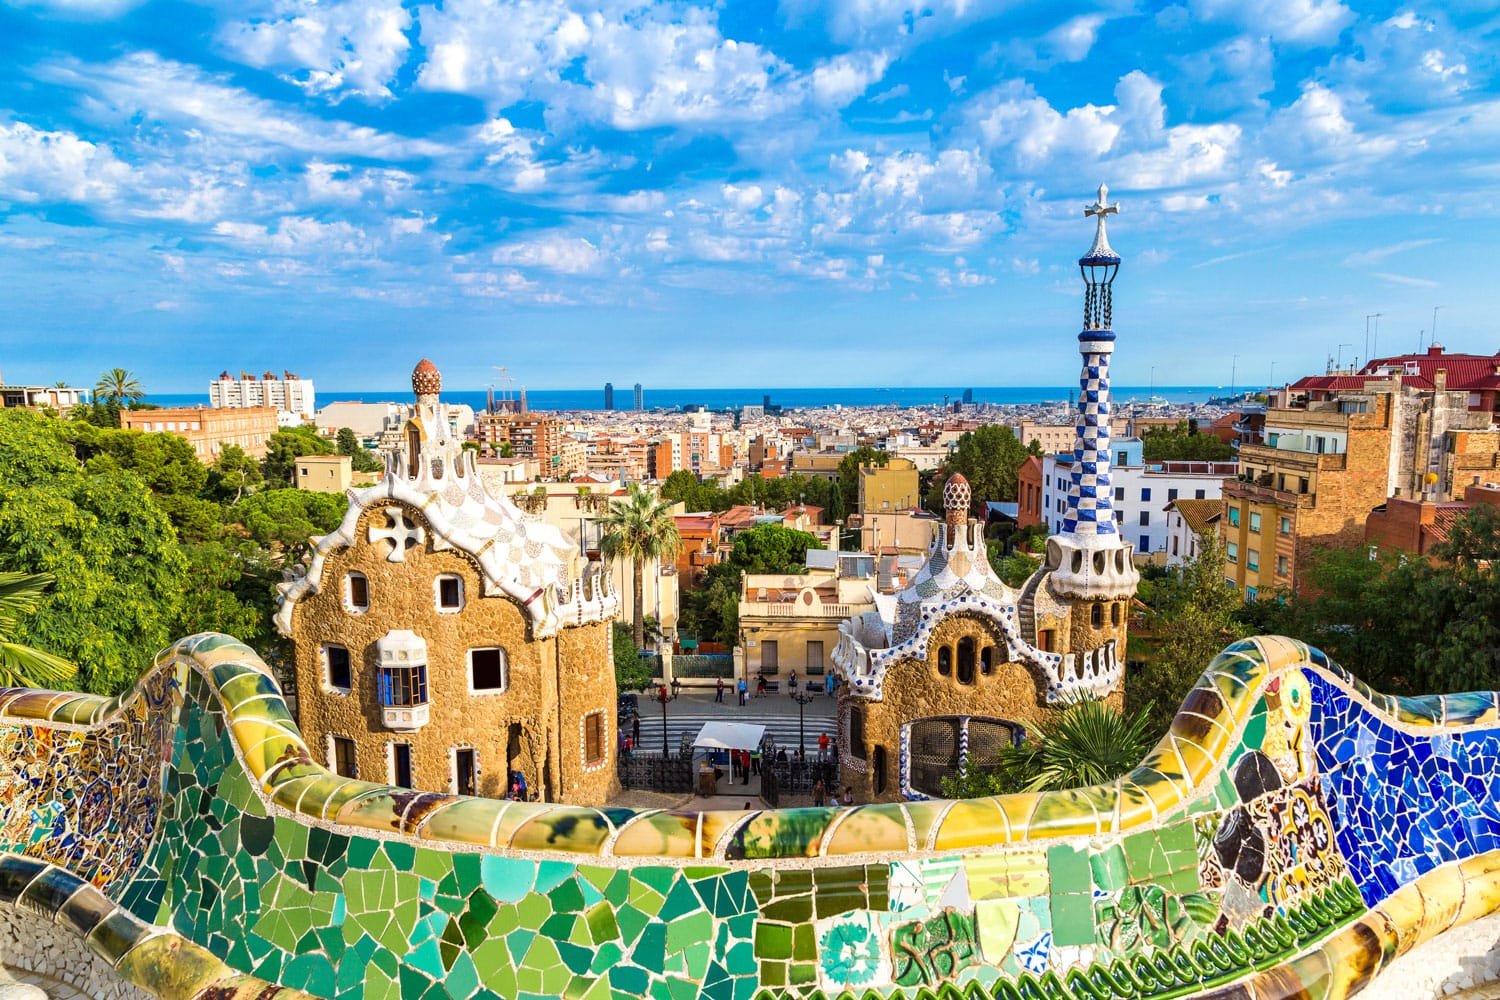 Park Guell by architect Gaudi in a summer day in Barcelona, Spain.